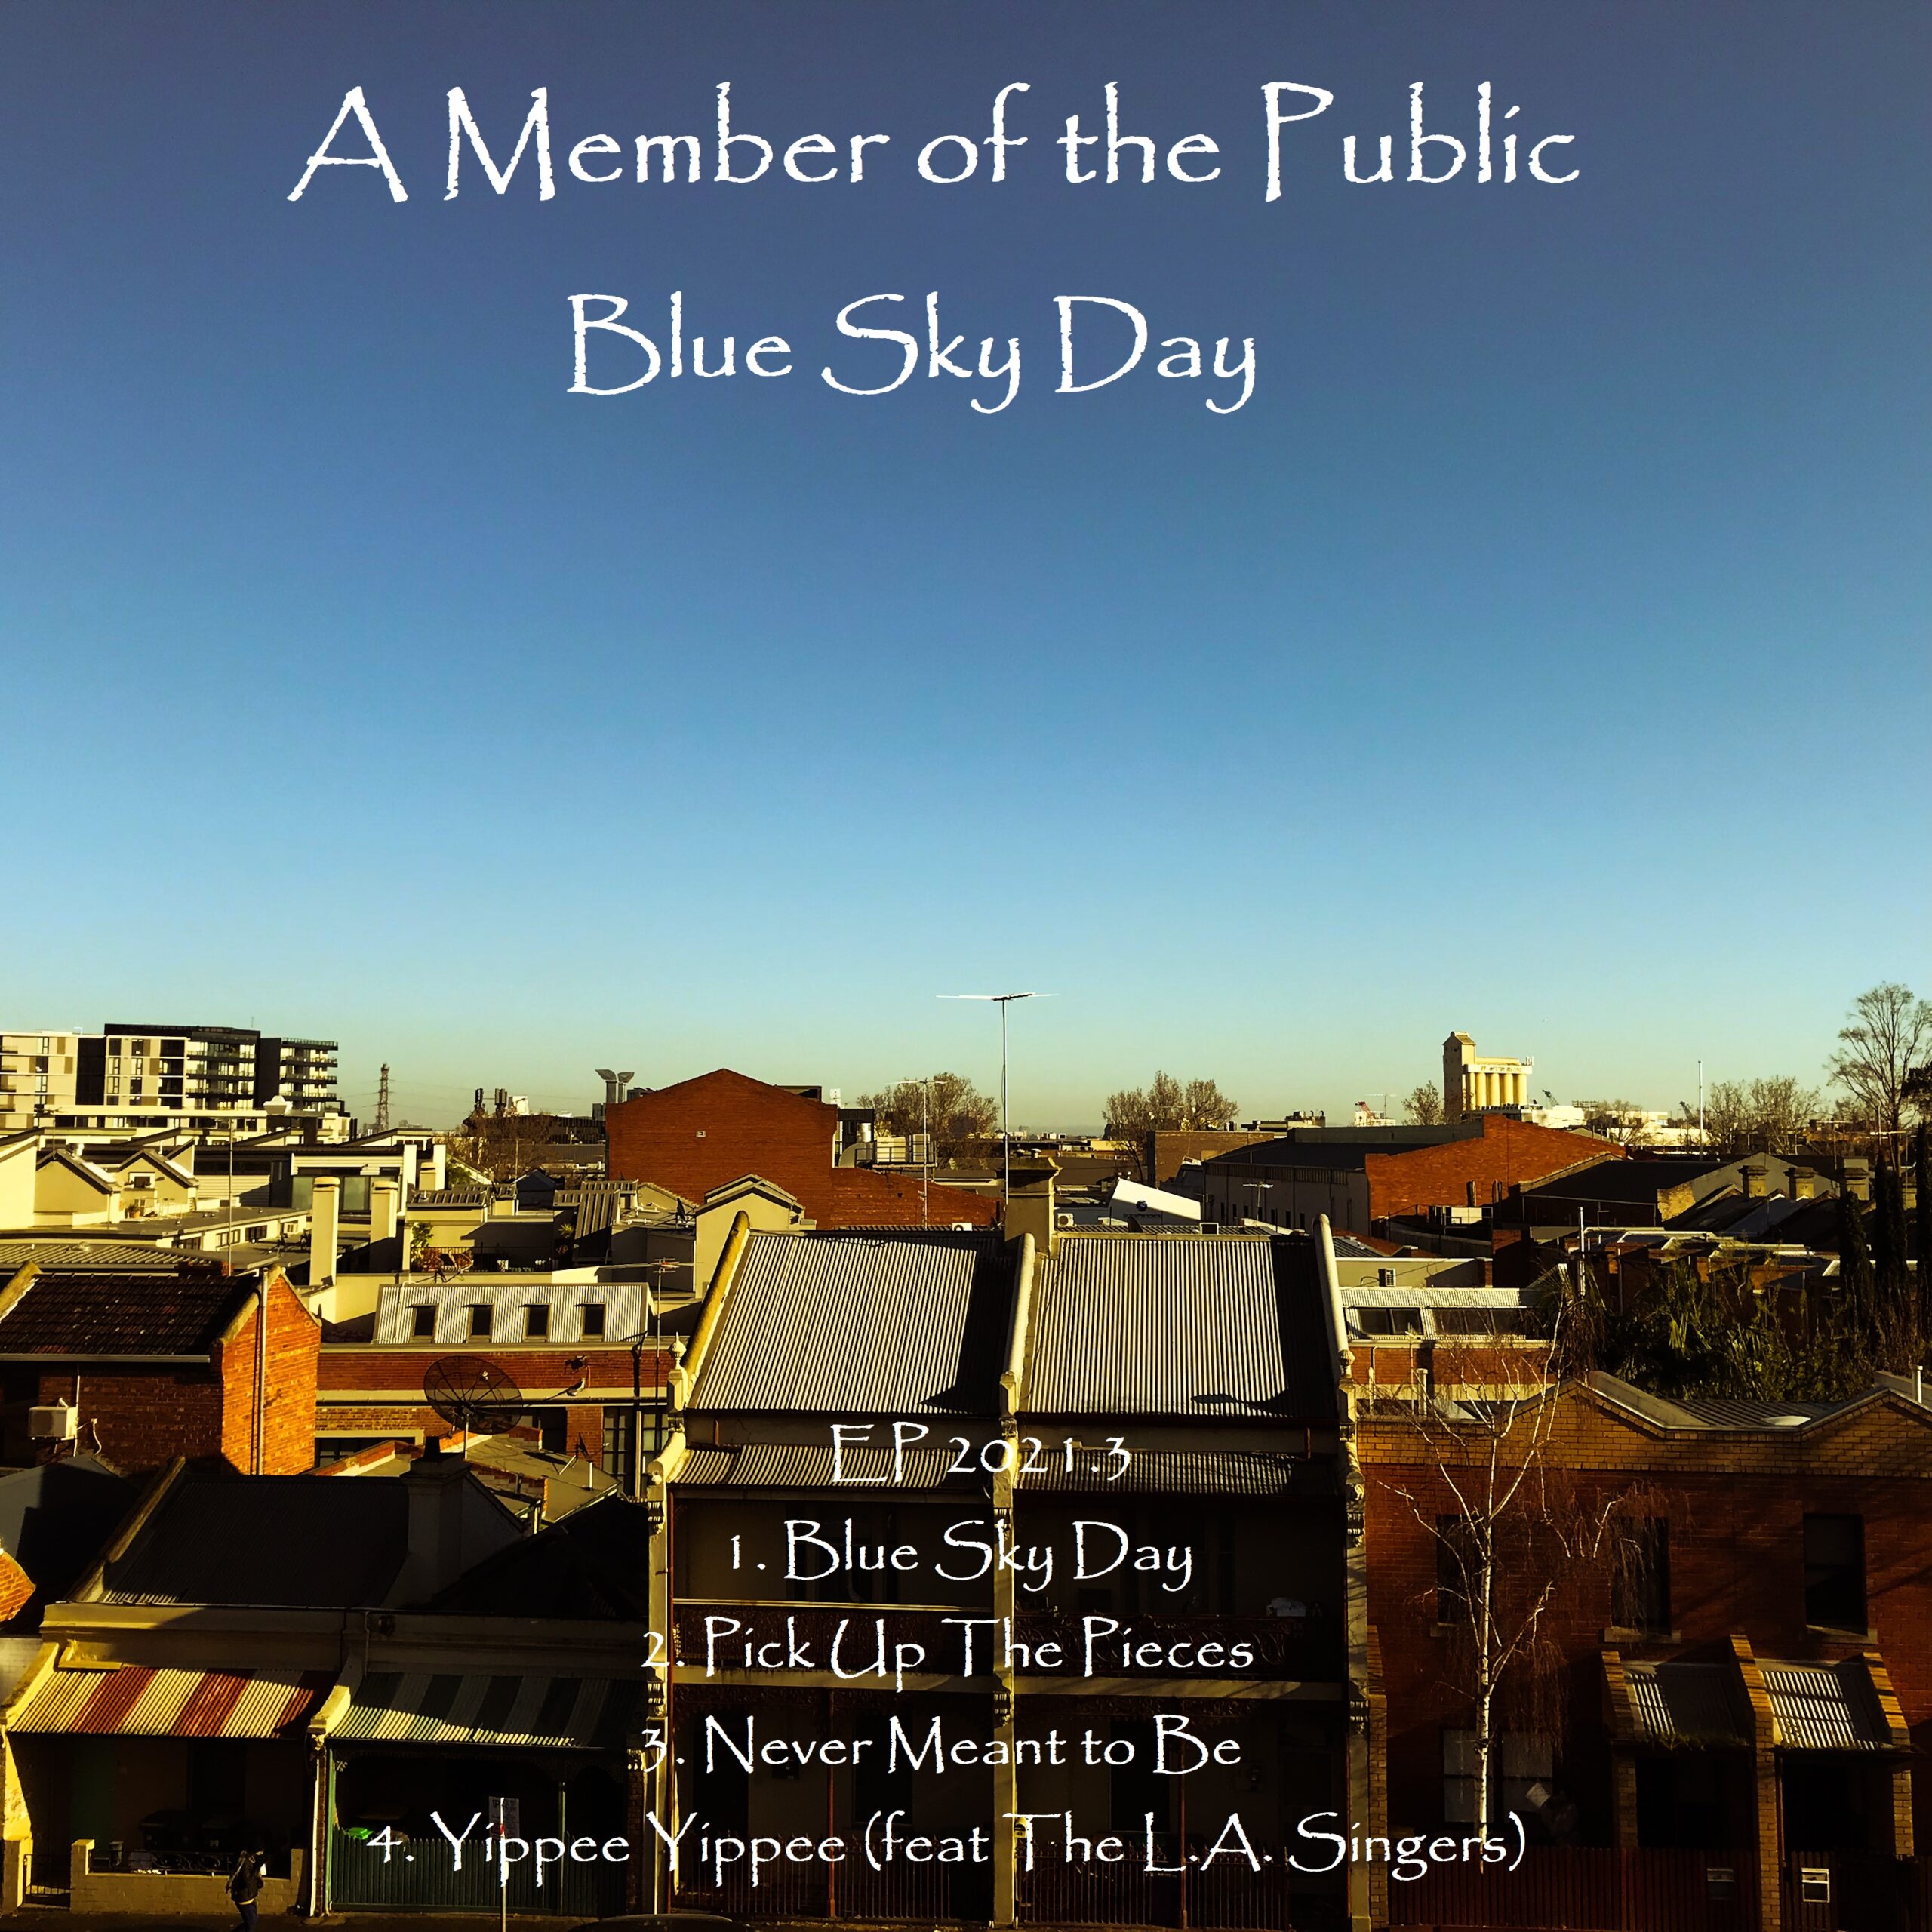 Blue Sky Day - A Member of the Public